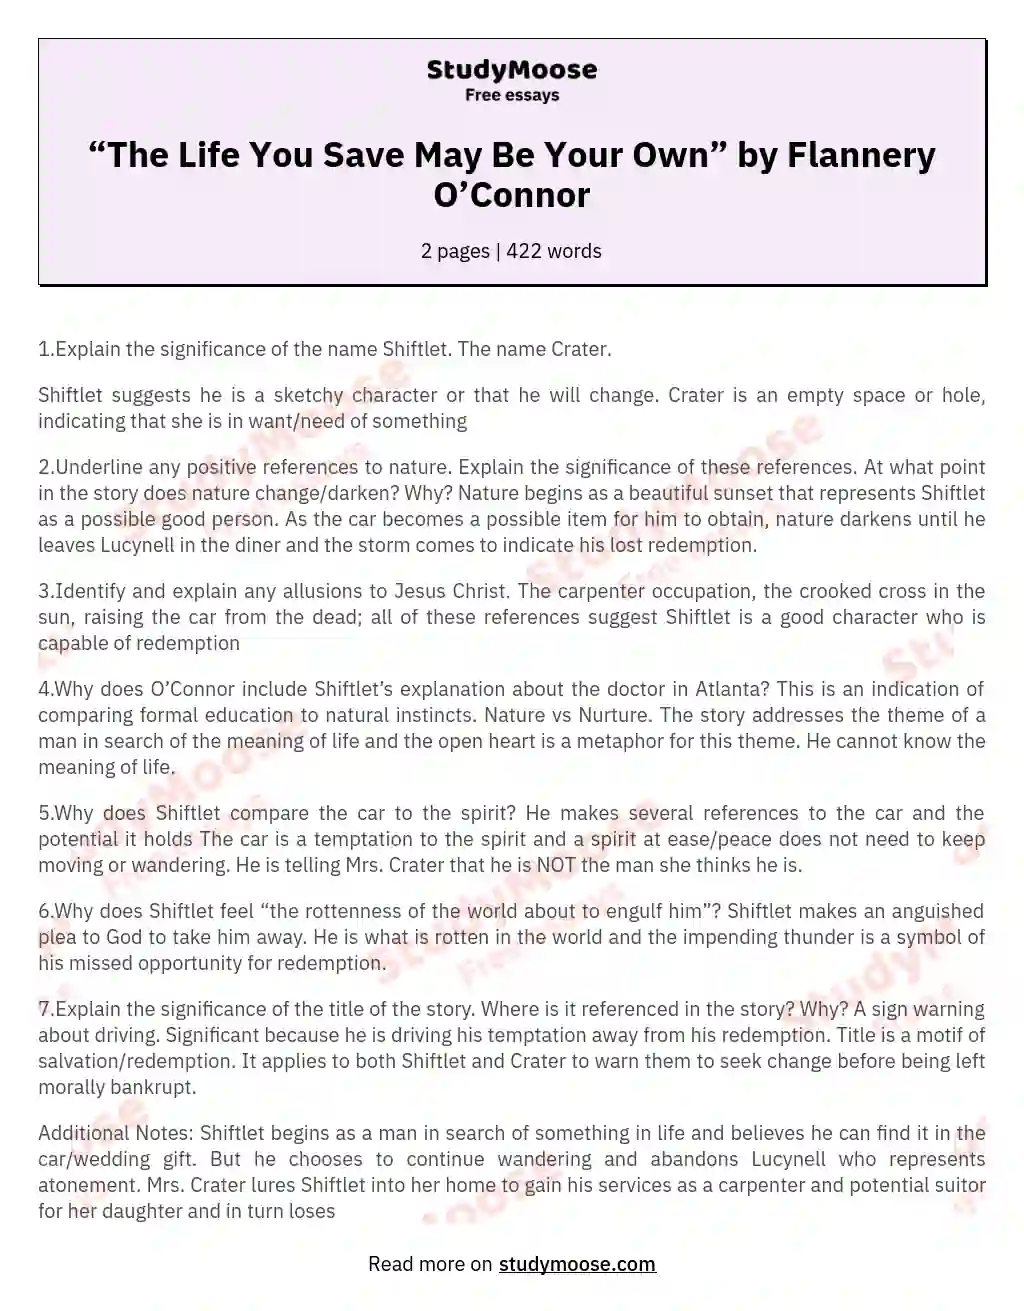 “The Life You Save May Be Your Own” by Flannery O’Connor essay